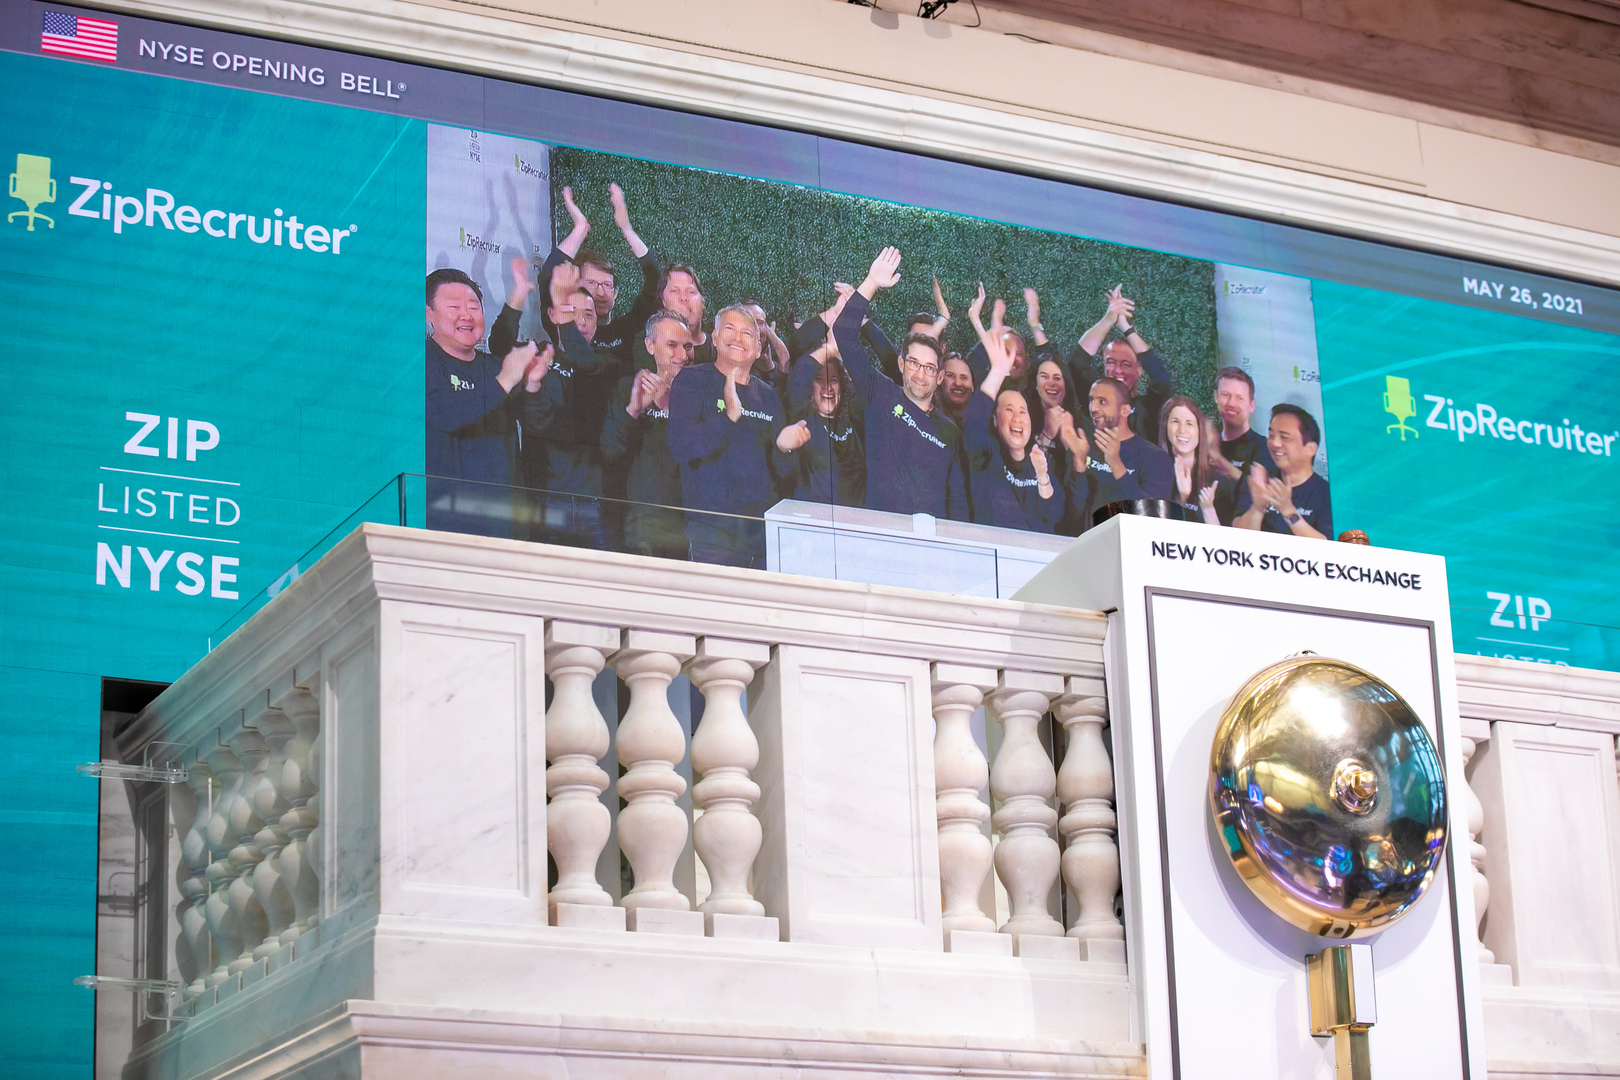 ZipRecruiter employees getting virtually ringing the bell at the New York Stock Exchange.